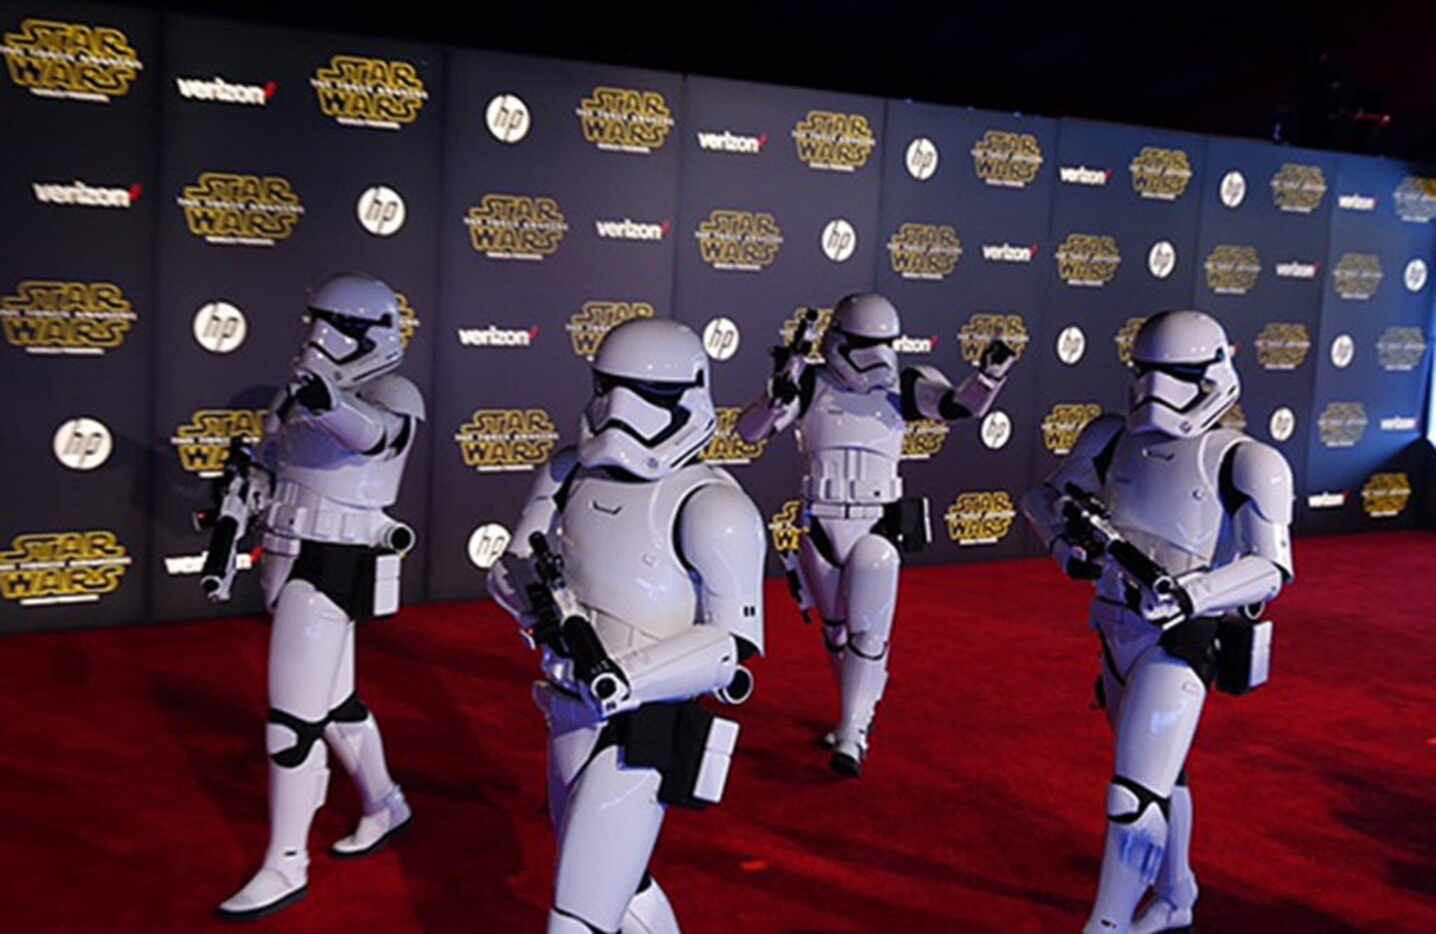 Stormtroopers walk the red carpet at the Hollywood premiere of "Star Wars: The Force...